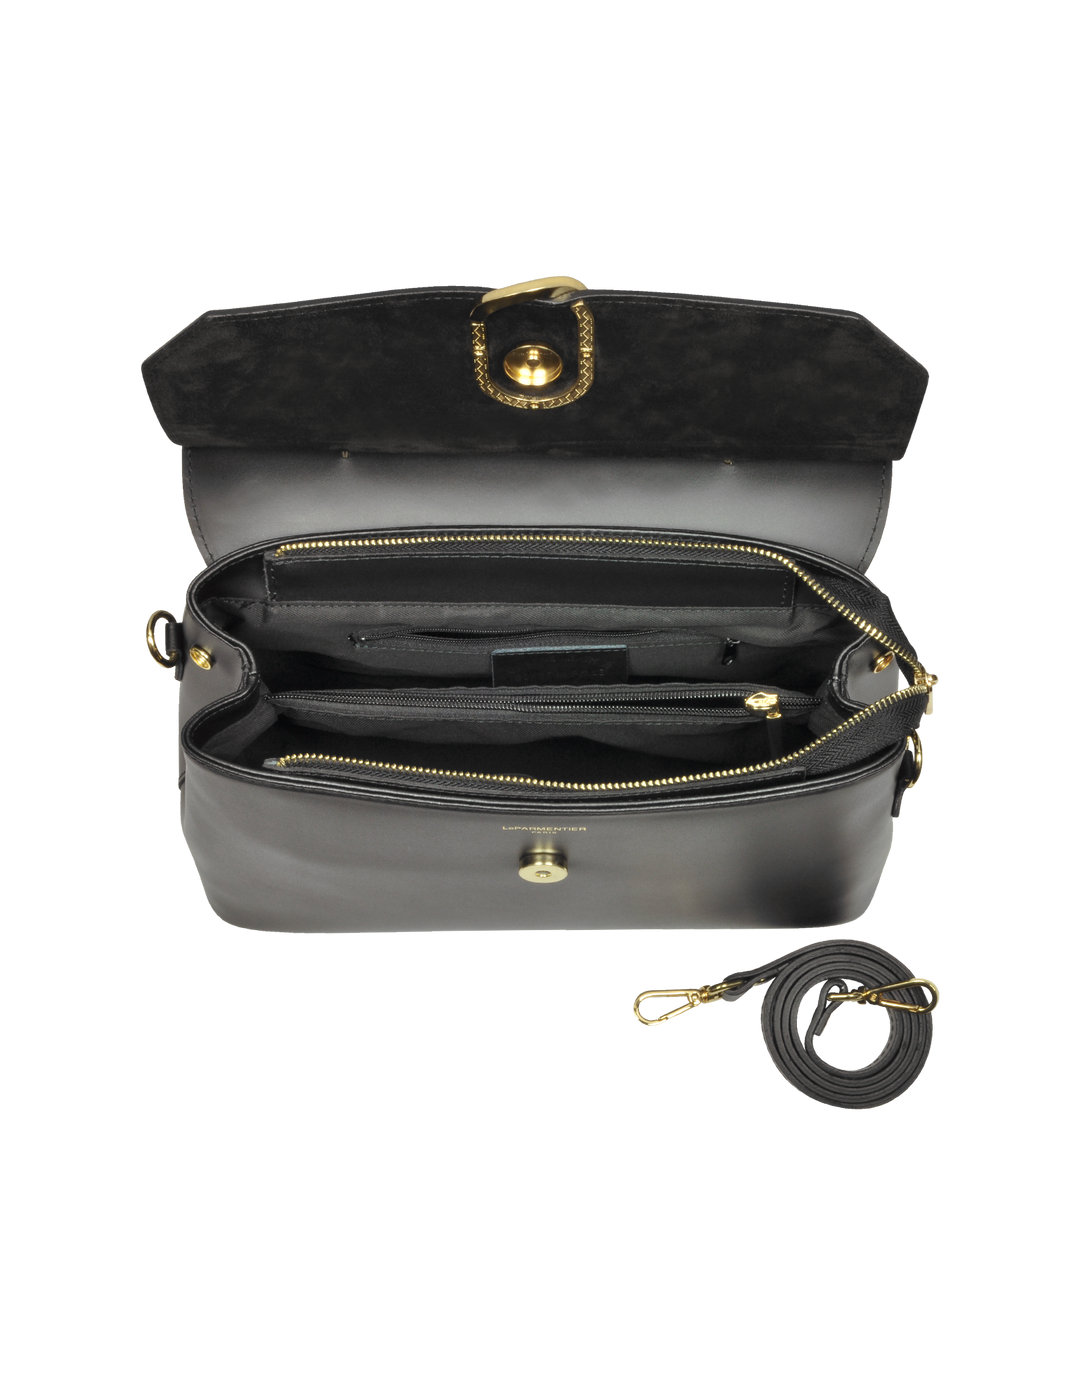 Open black leather handbag with internal compartments and detachable strap